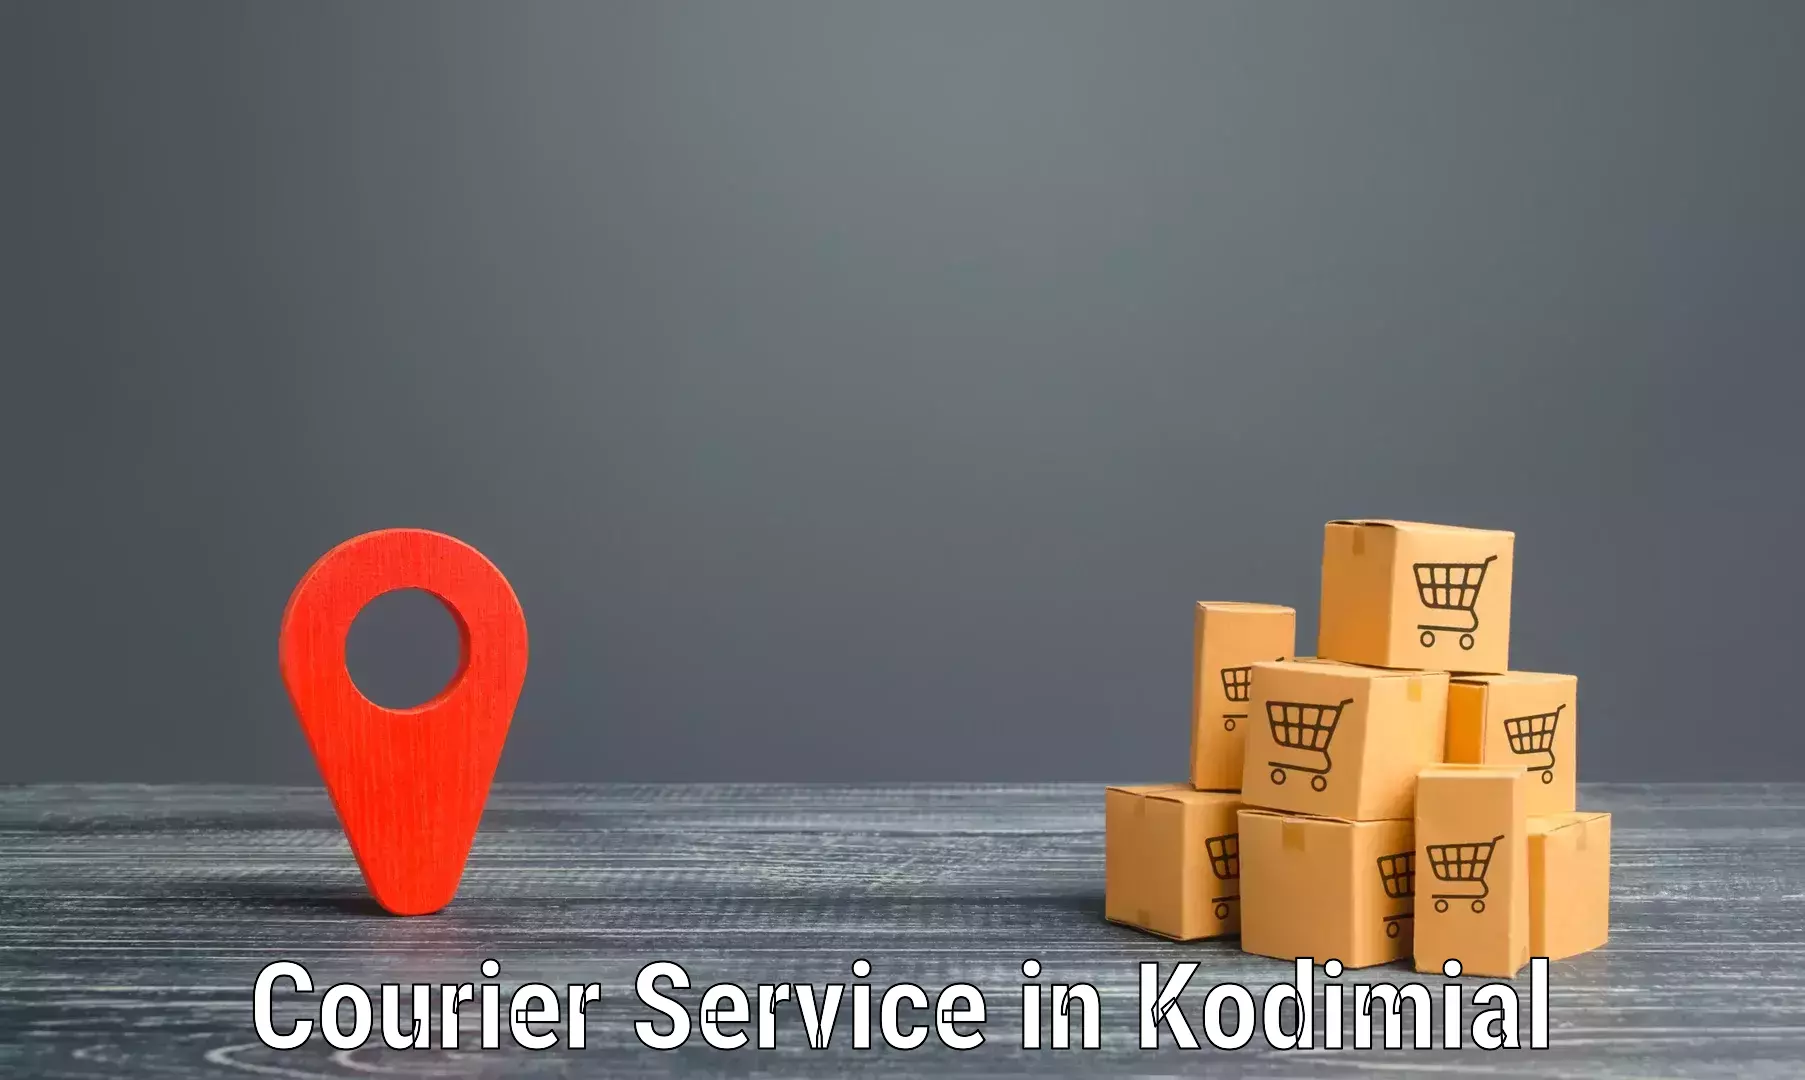 Efficient cargo services in Kodimial